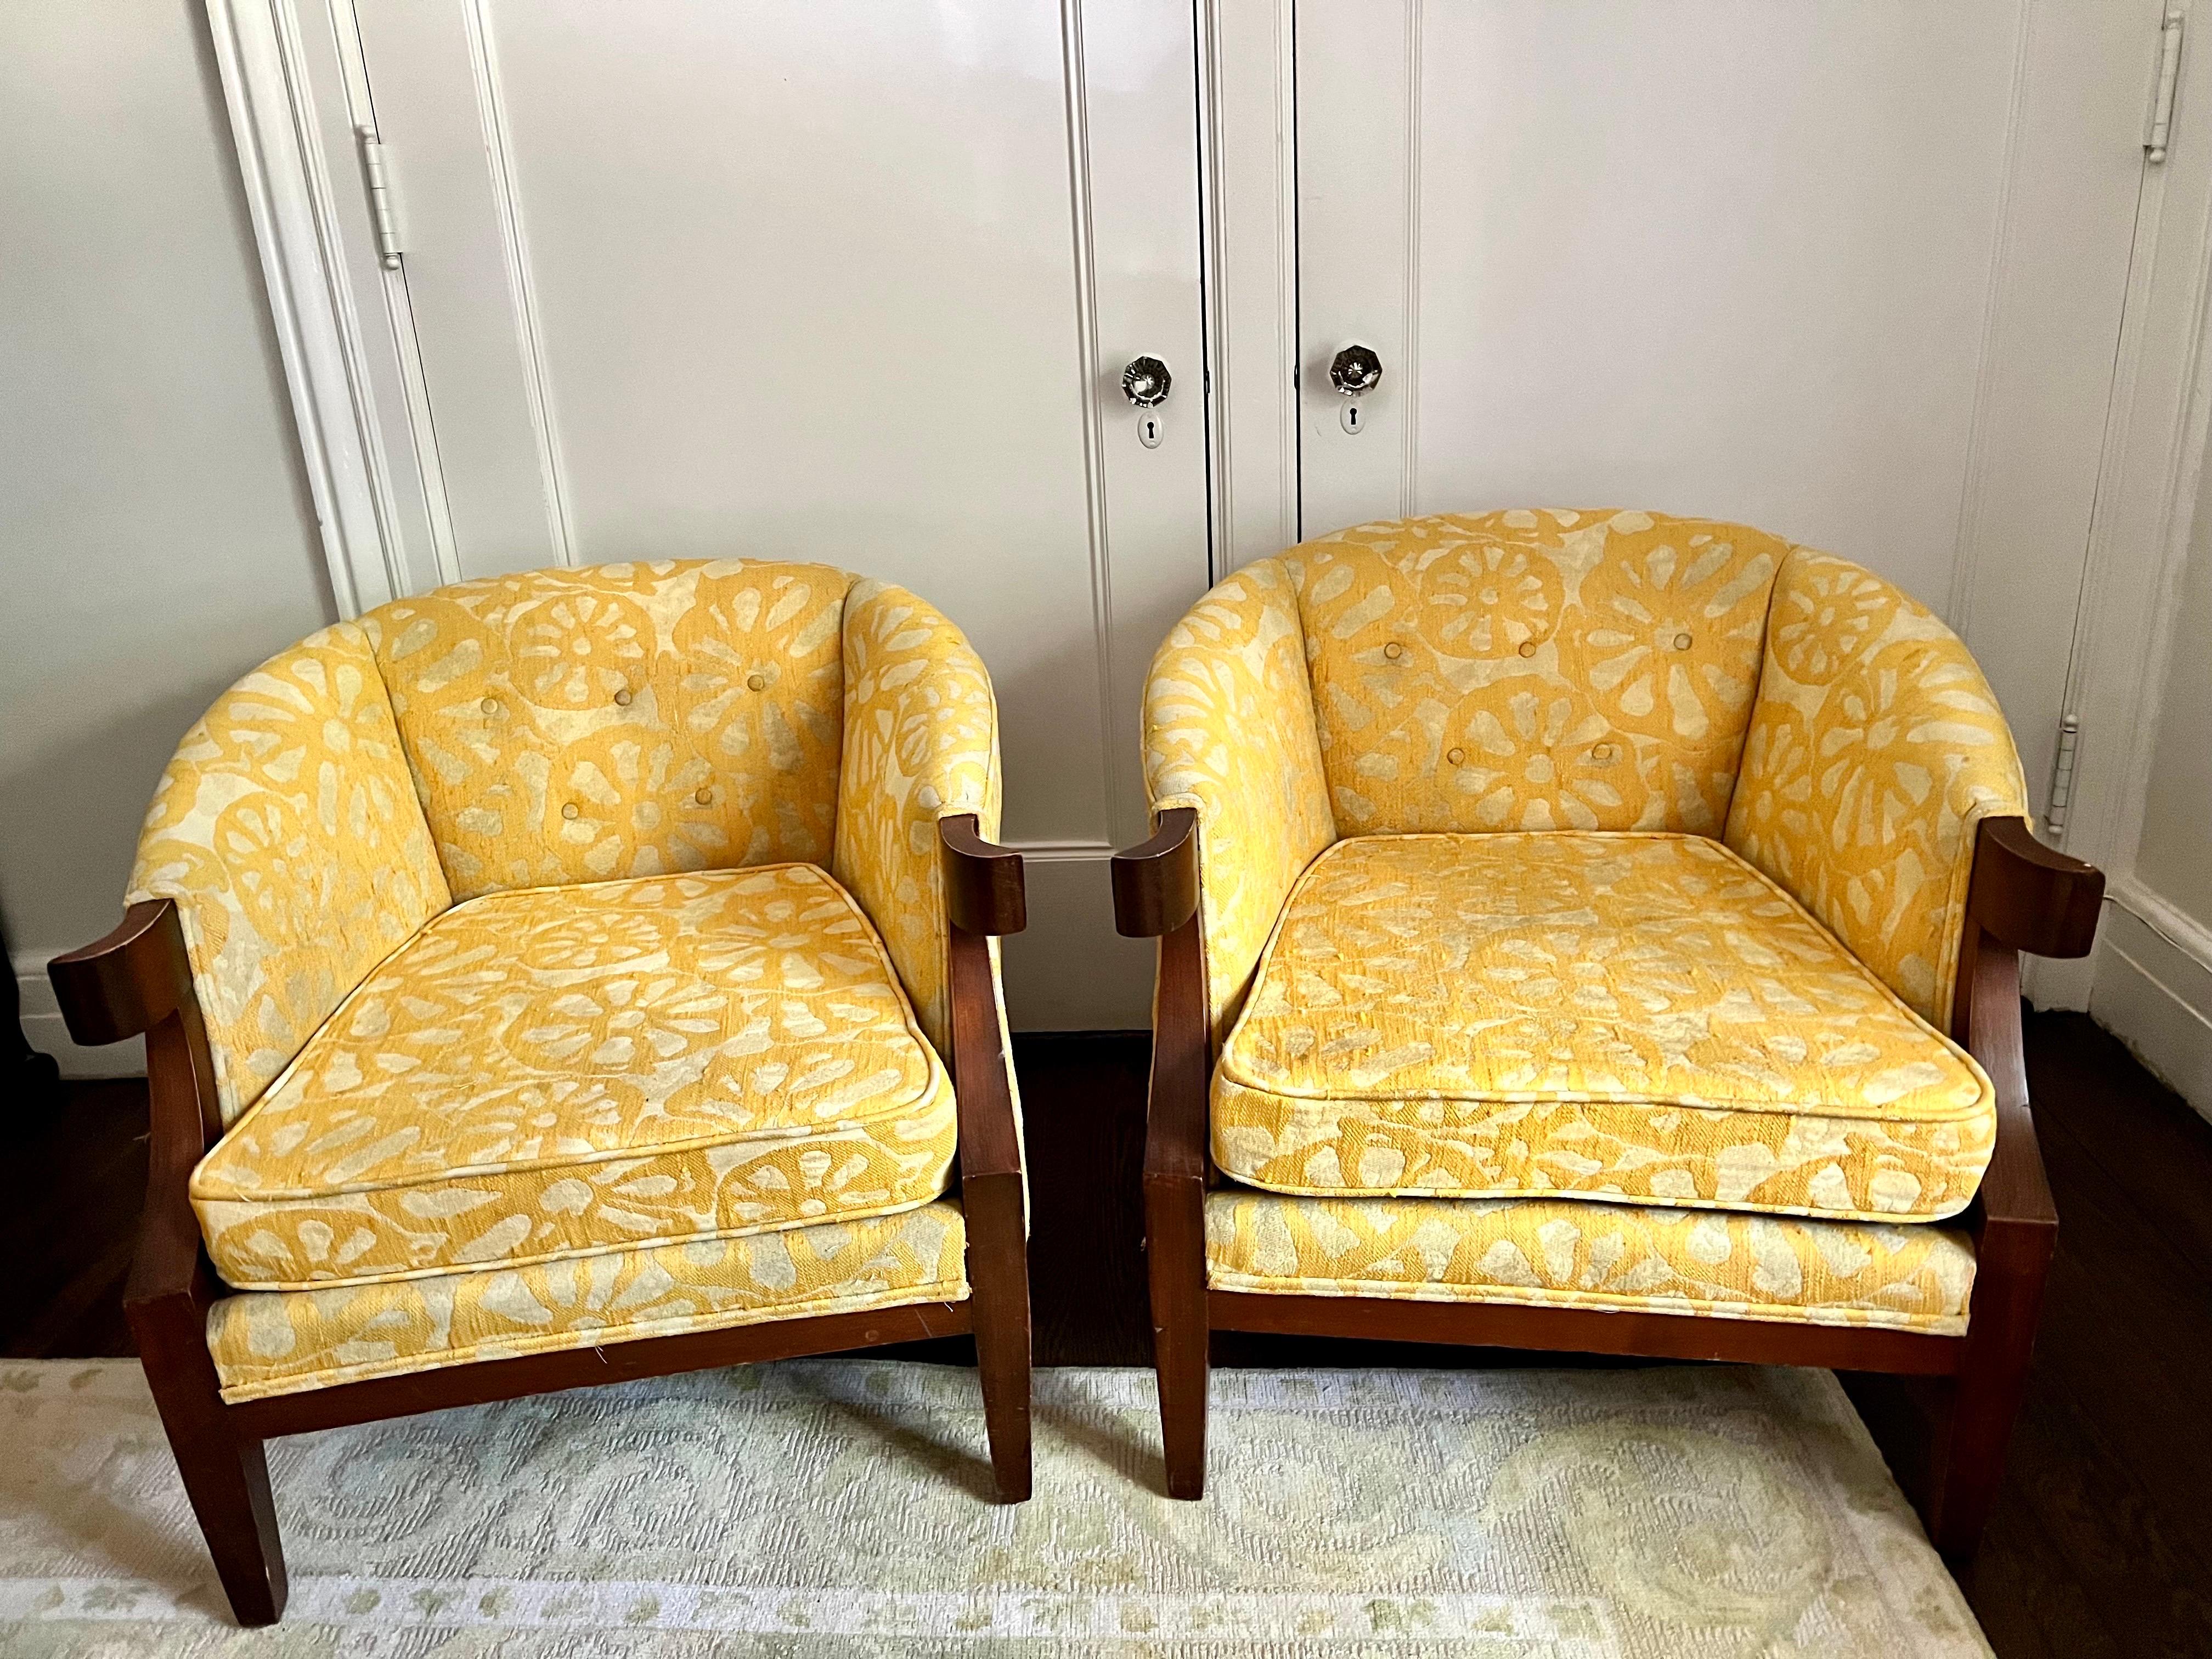 Vintage mid century barrel back chairs with original yellow floral print upholstery. The fabric has age appropriate wear as one would expect. Add a pop of brightness to your decor! Set your home apart with Revival Home.